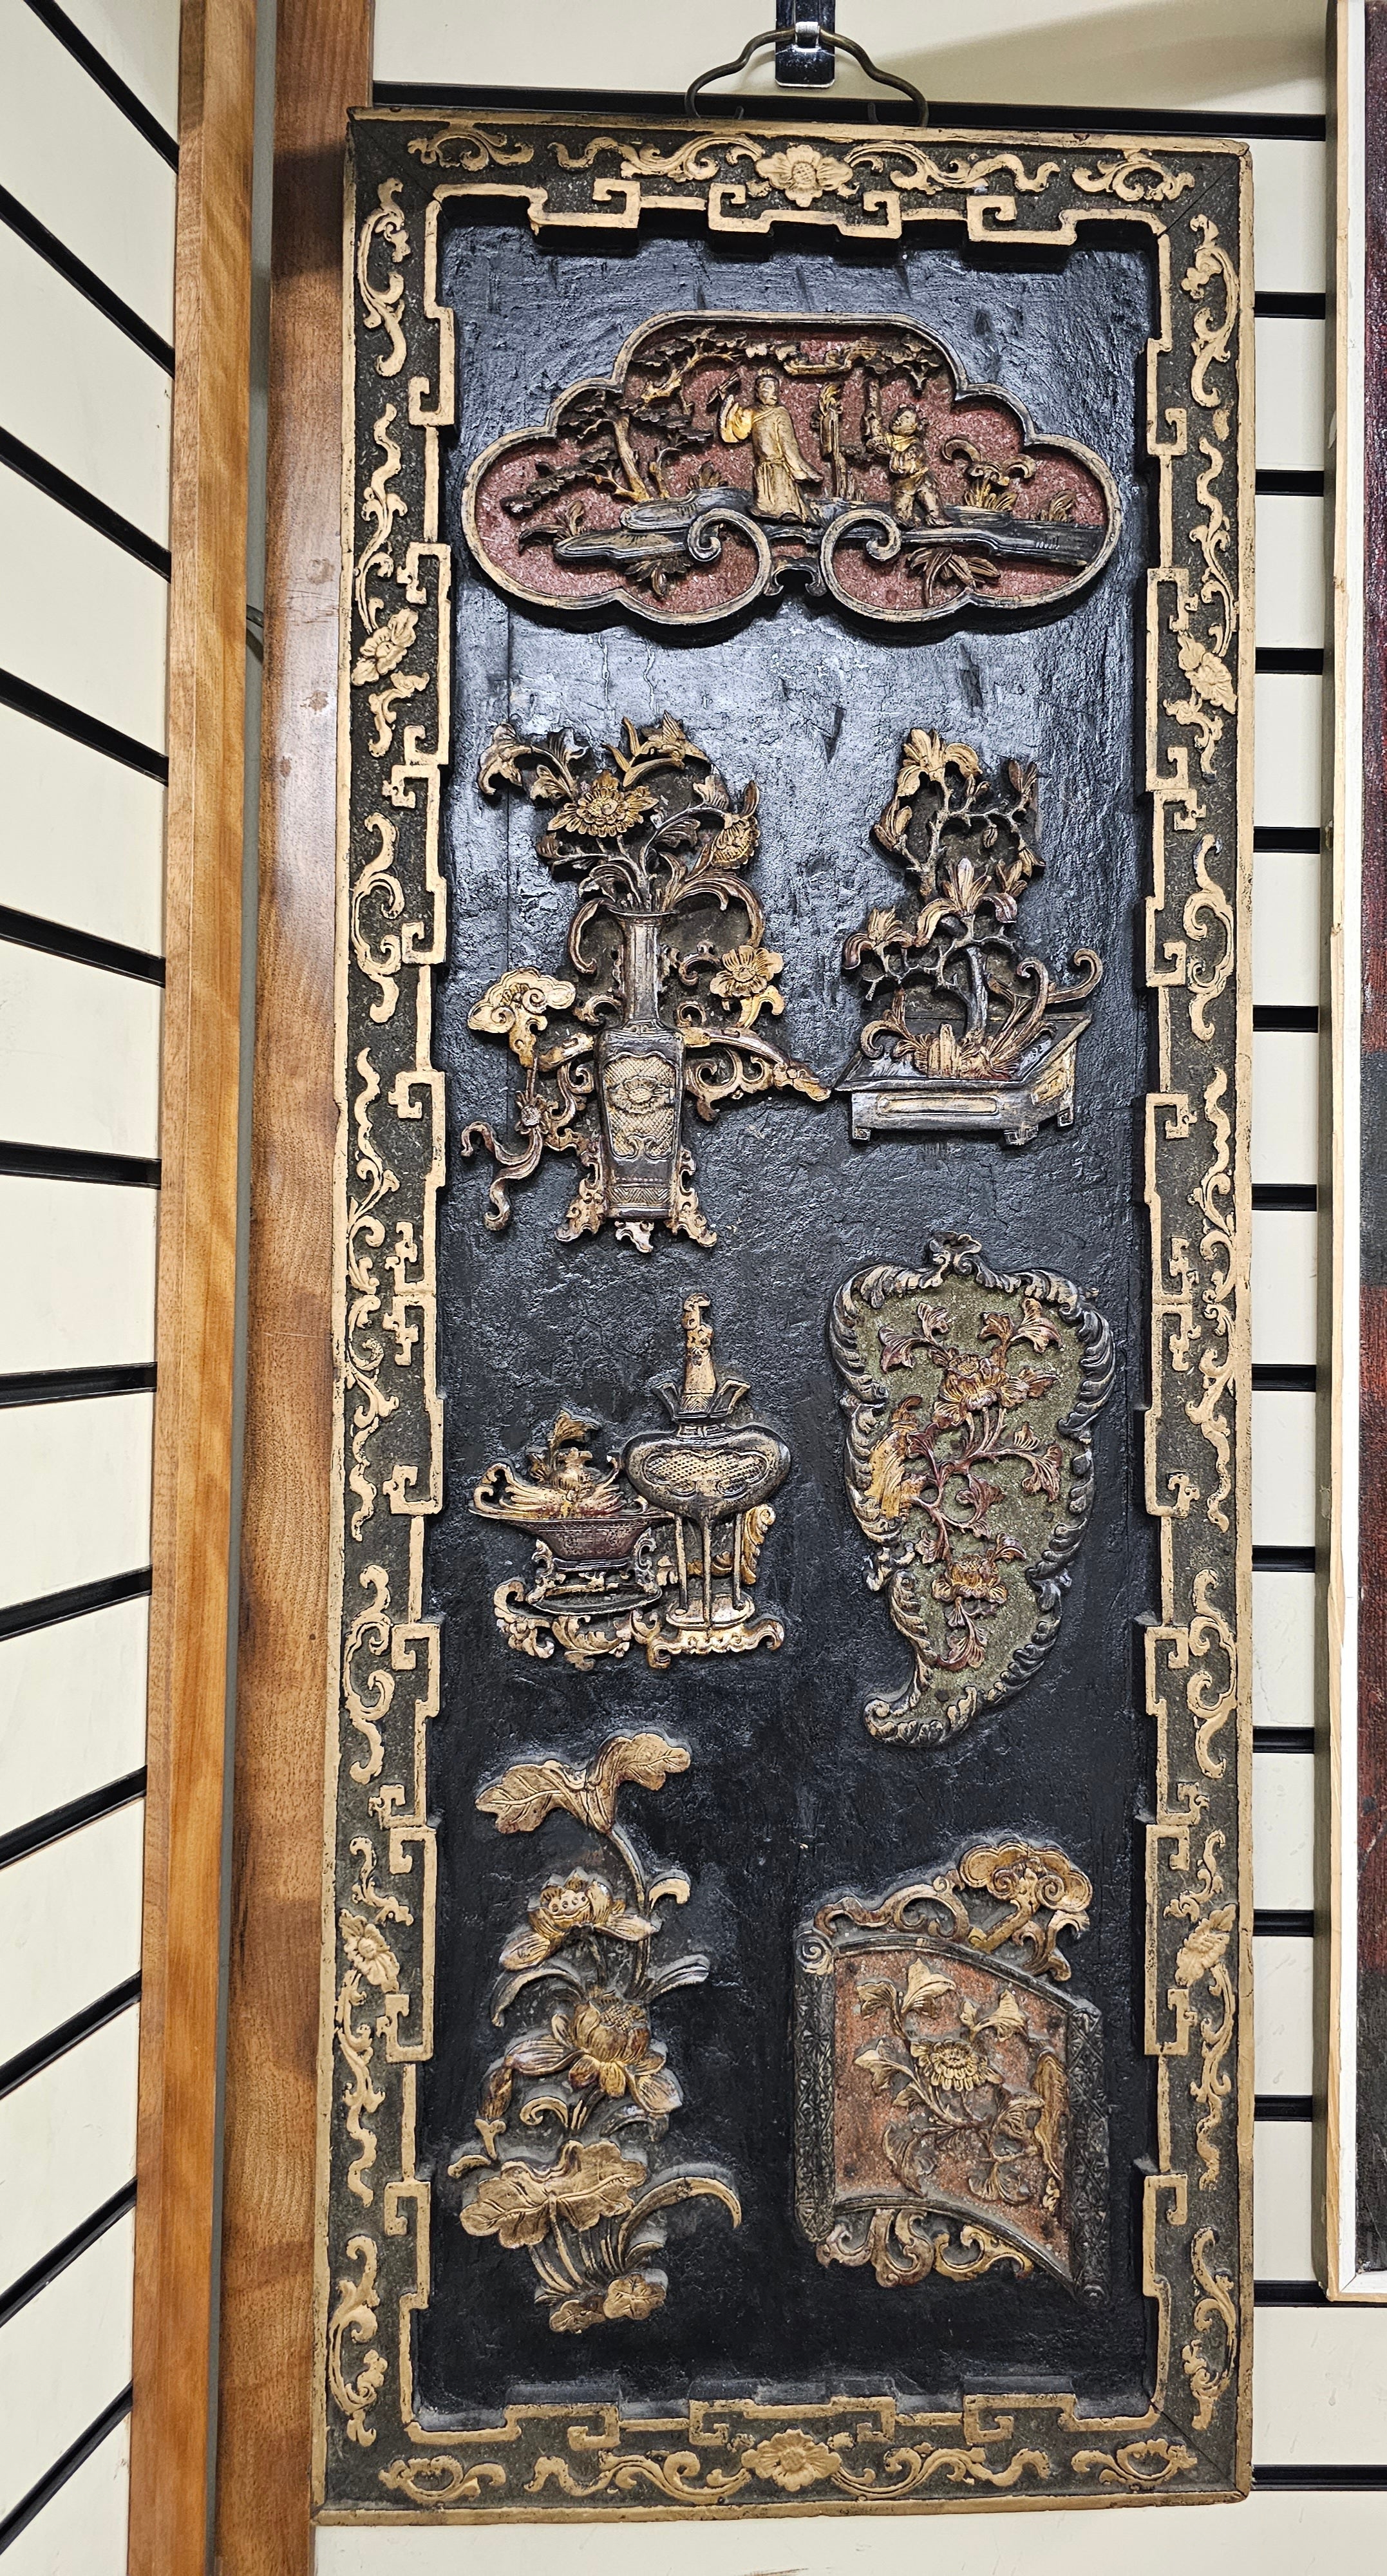 Chinese Parcel Gilt, Ebonized  and Decorated Wood Wall Hanging Plaque.
Measures 15